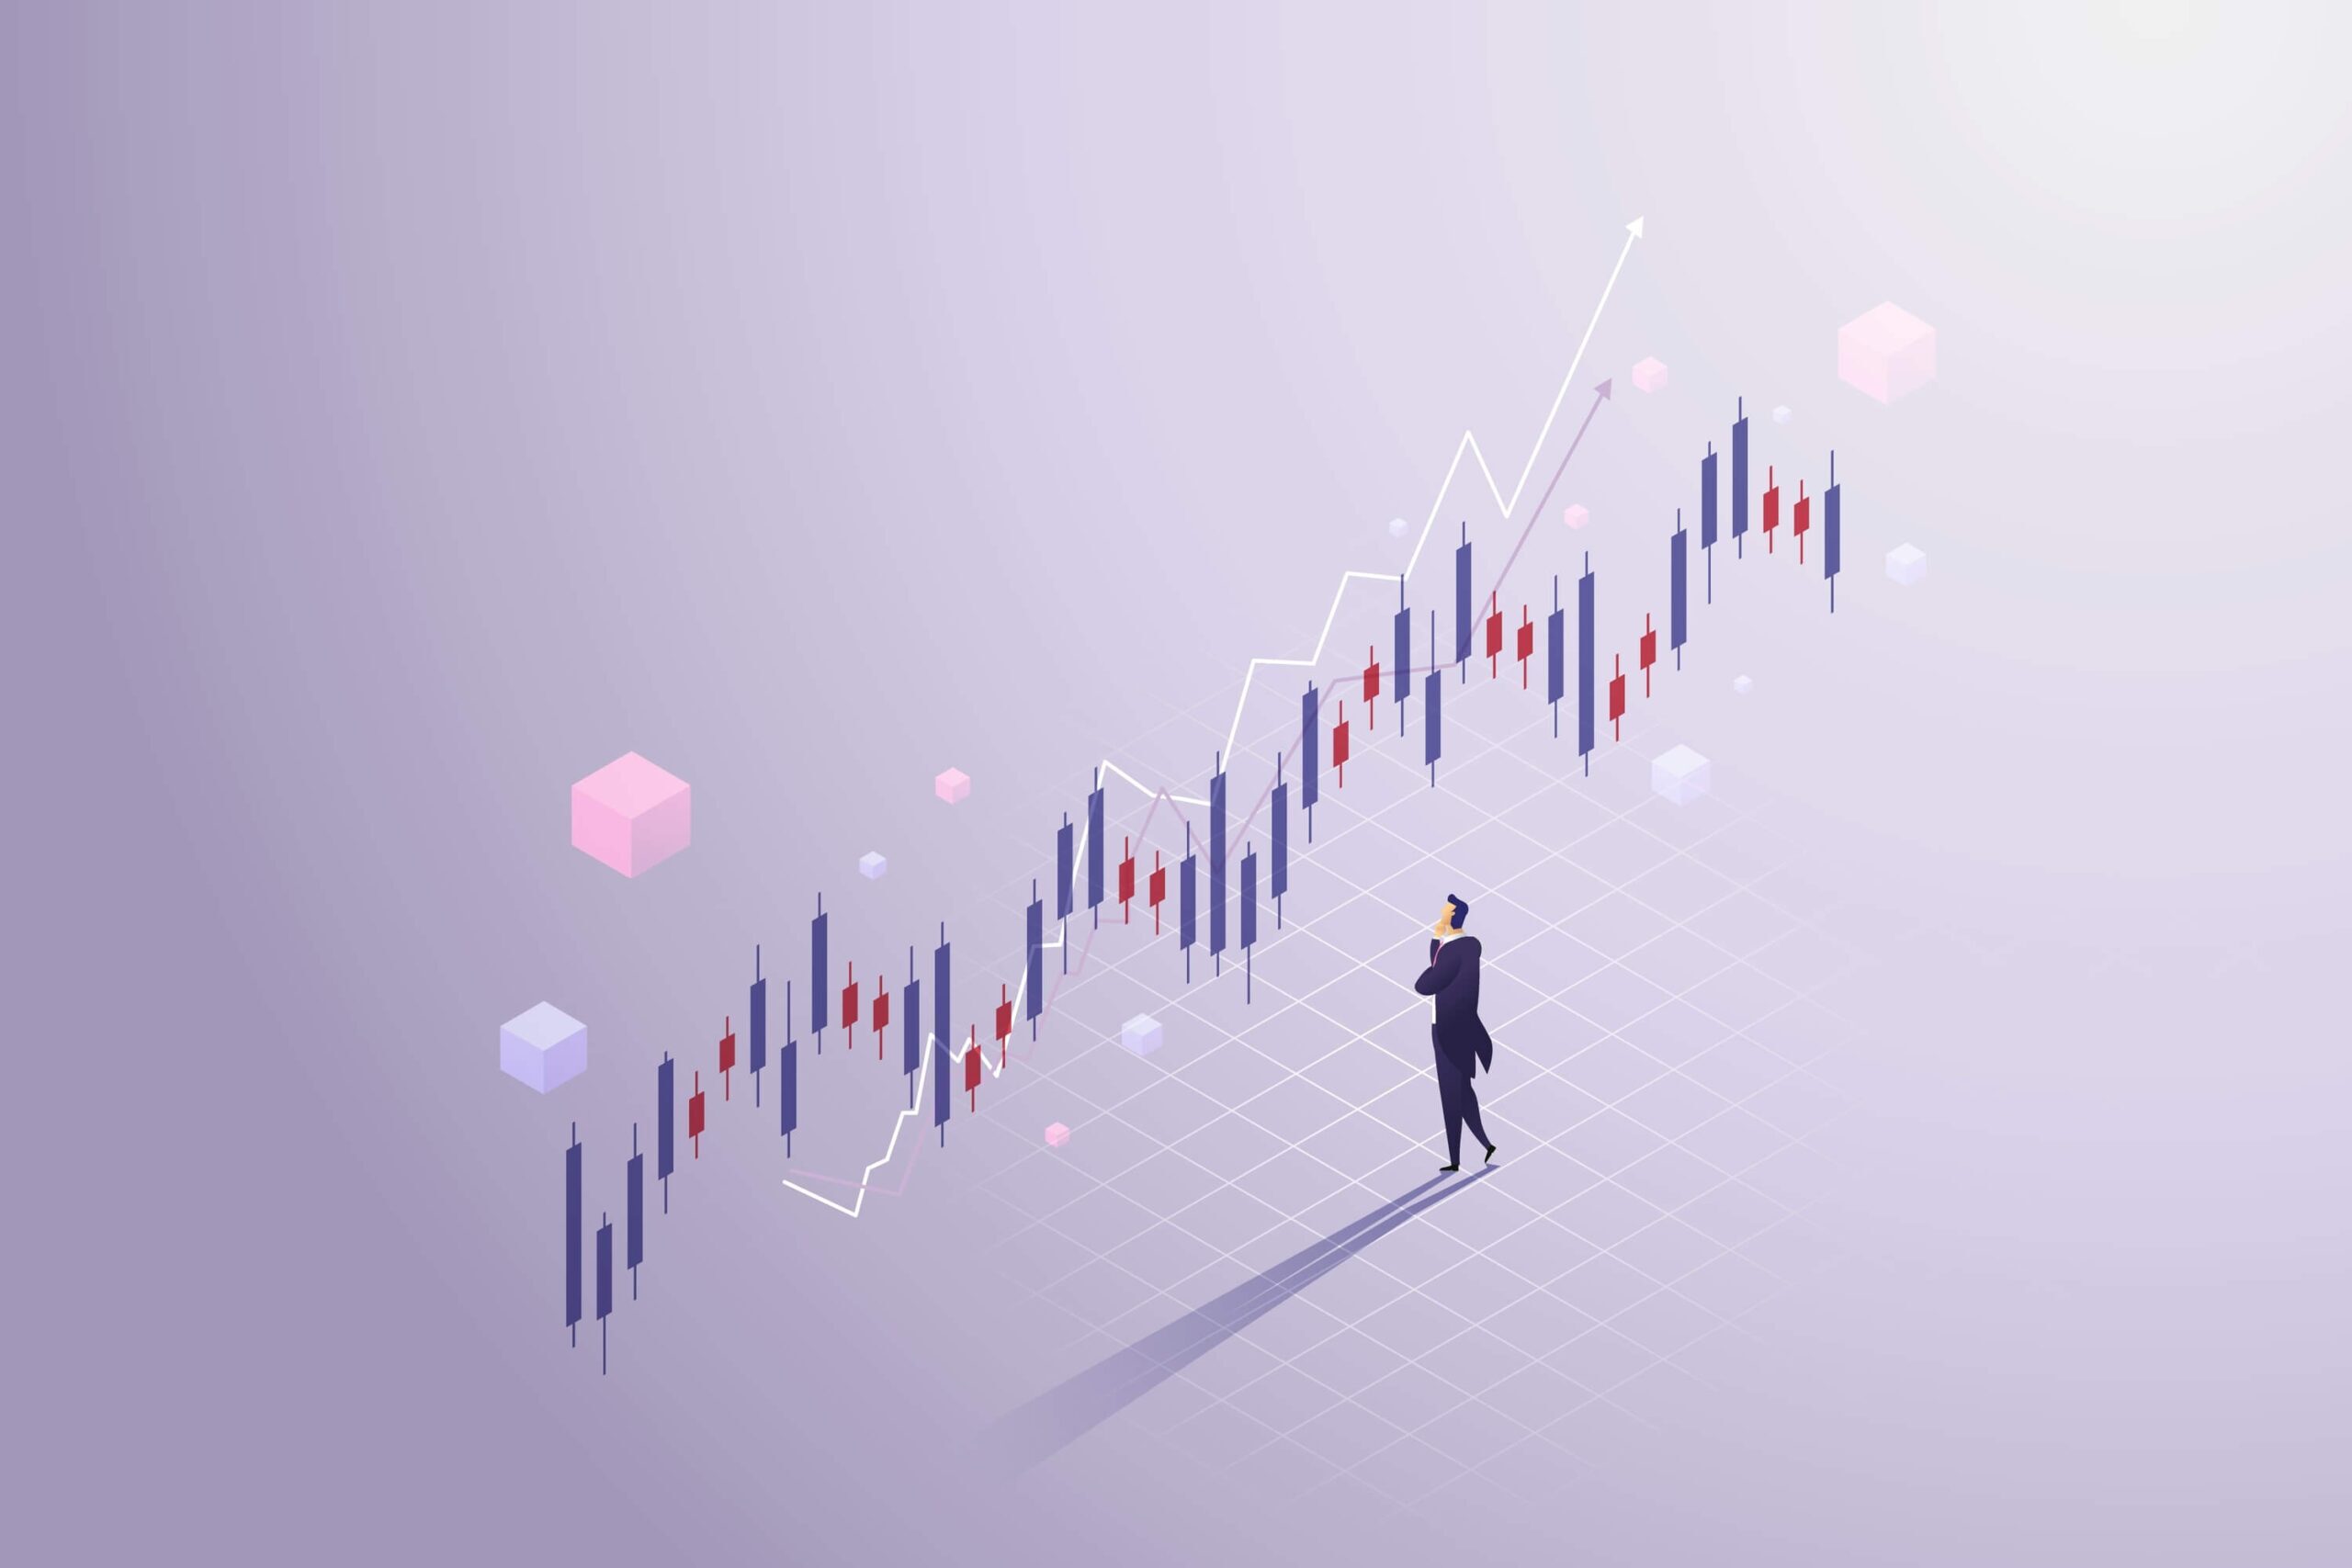 Crypto trading illustration with sideways candle chart